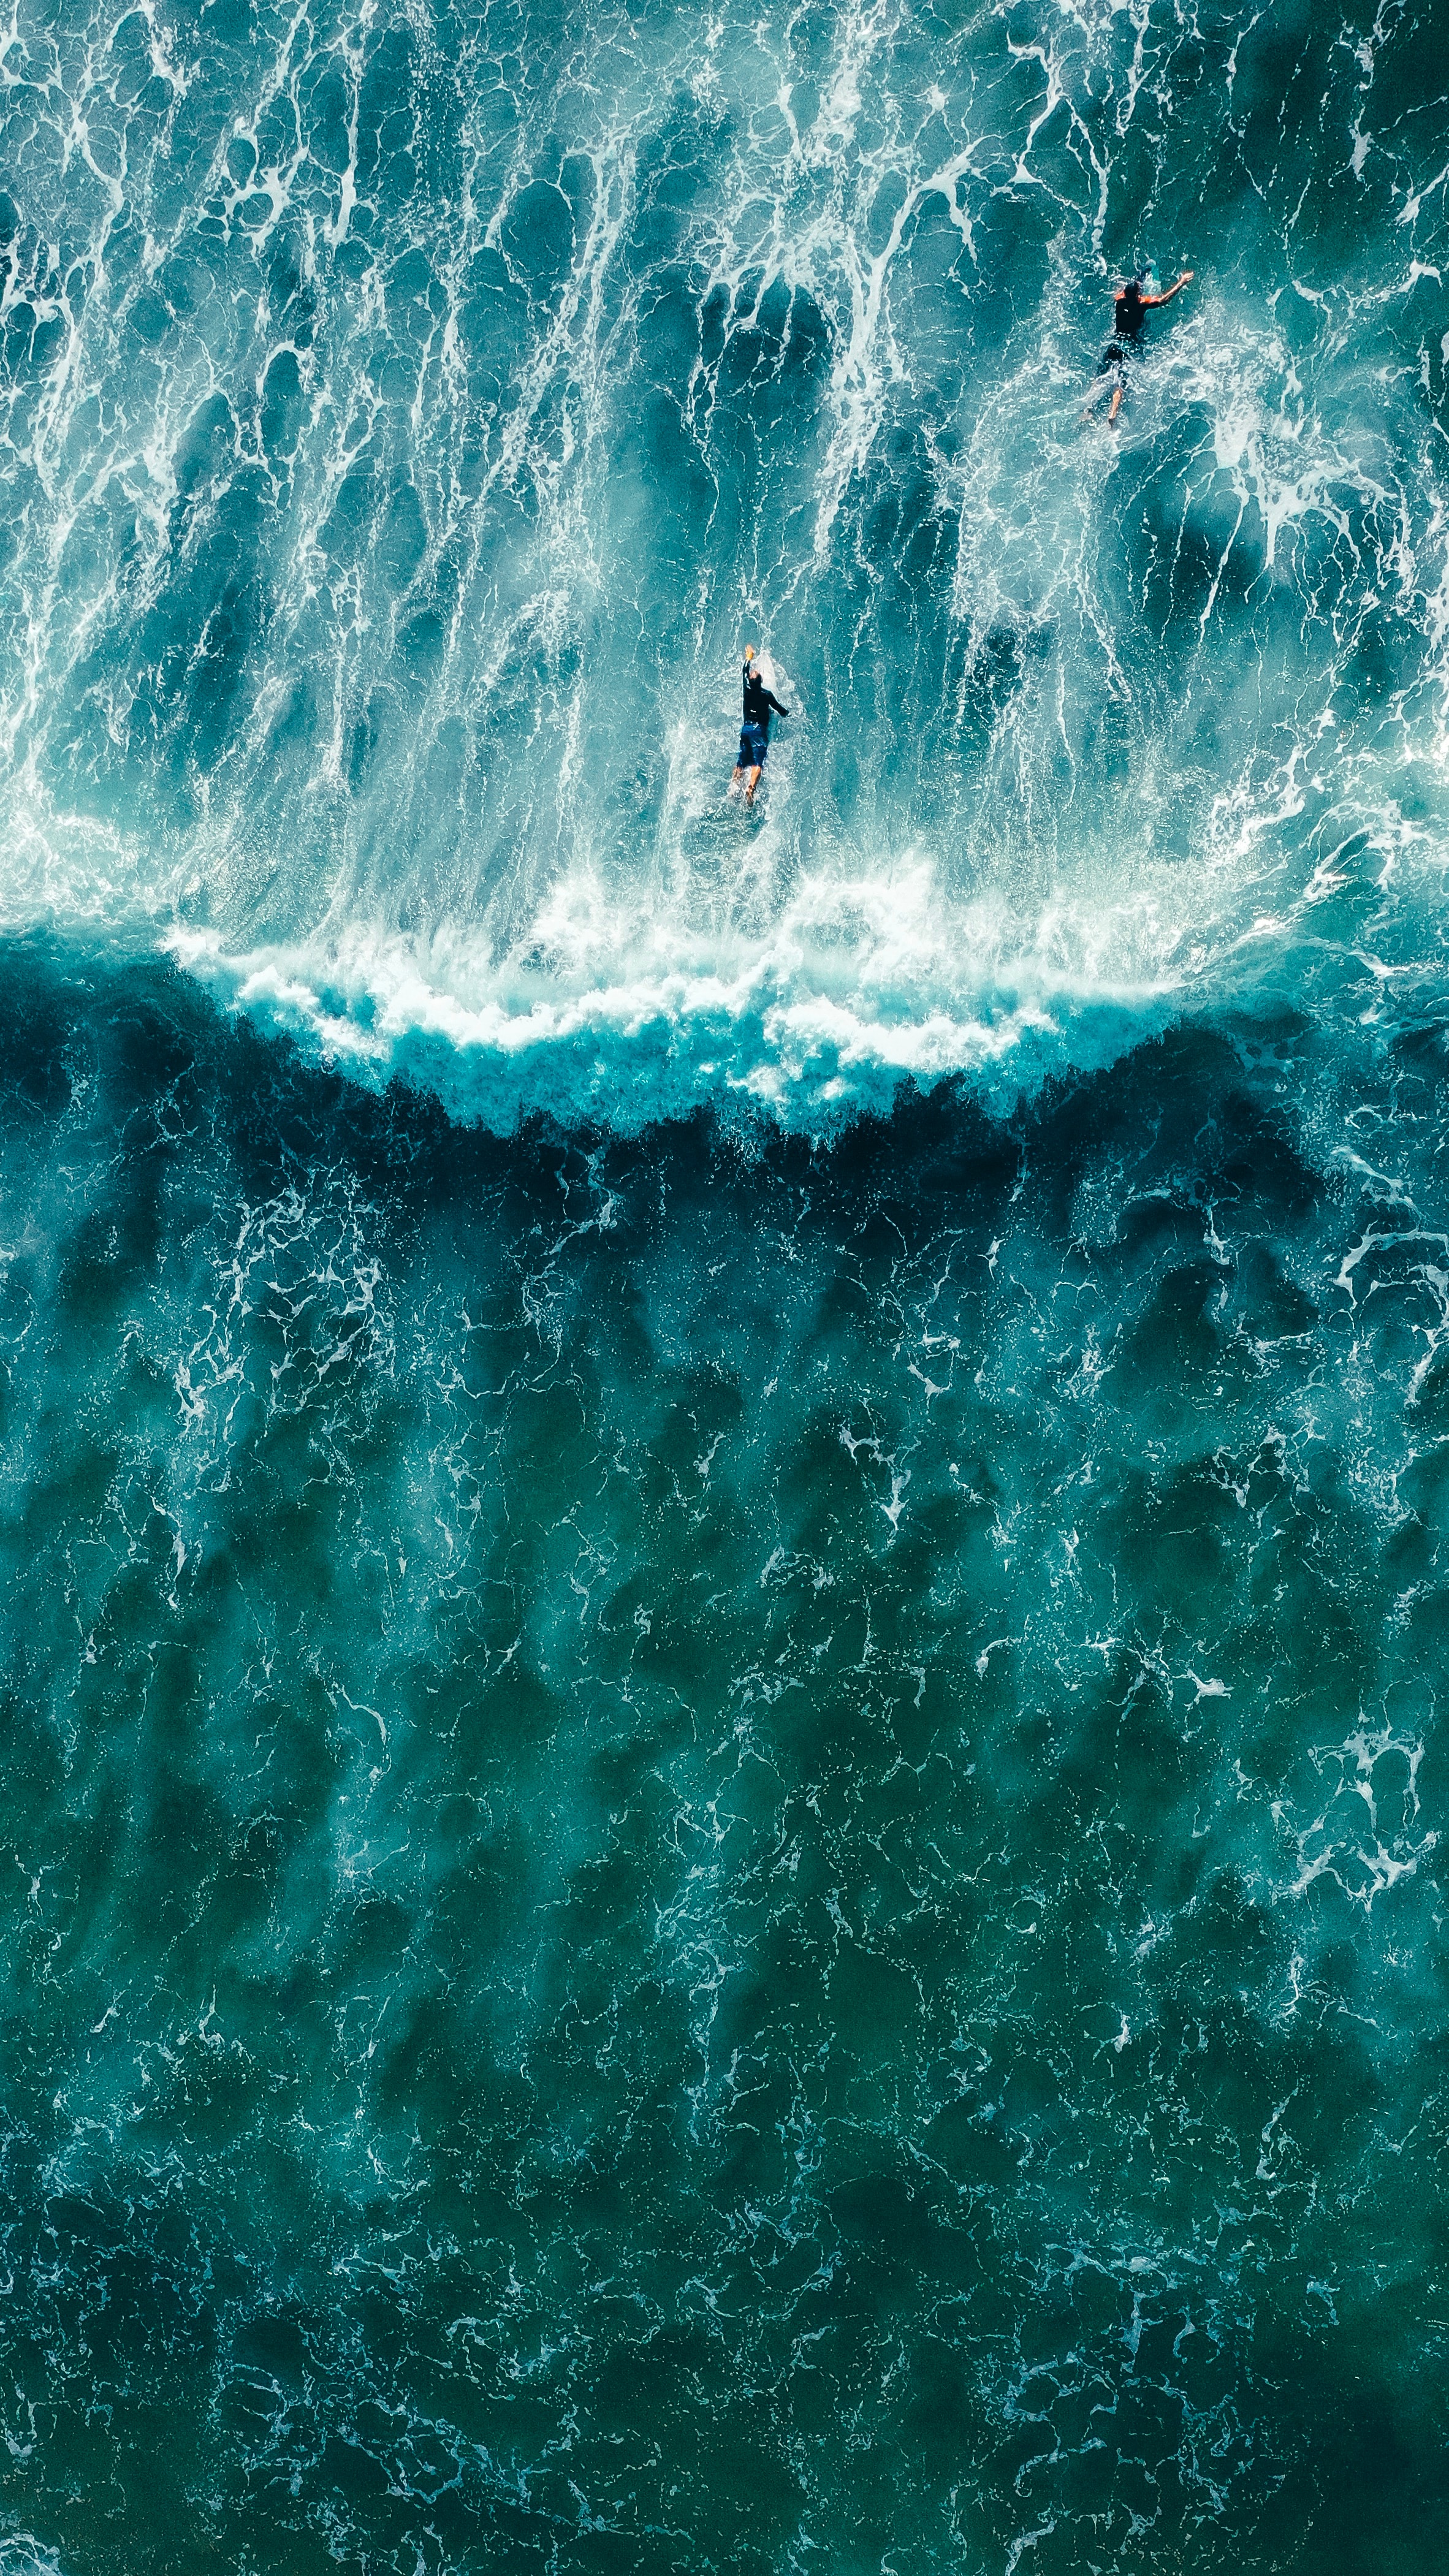 waves, view from above, sports, serfing, ocean, surfers